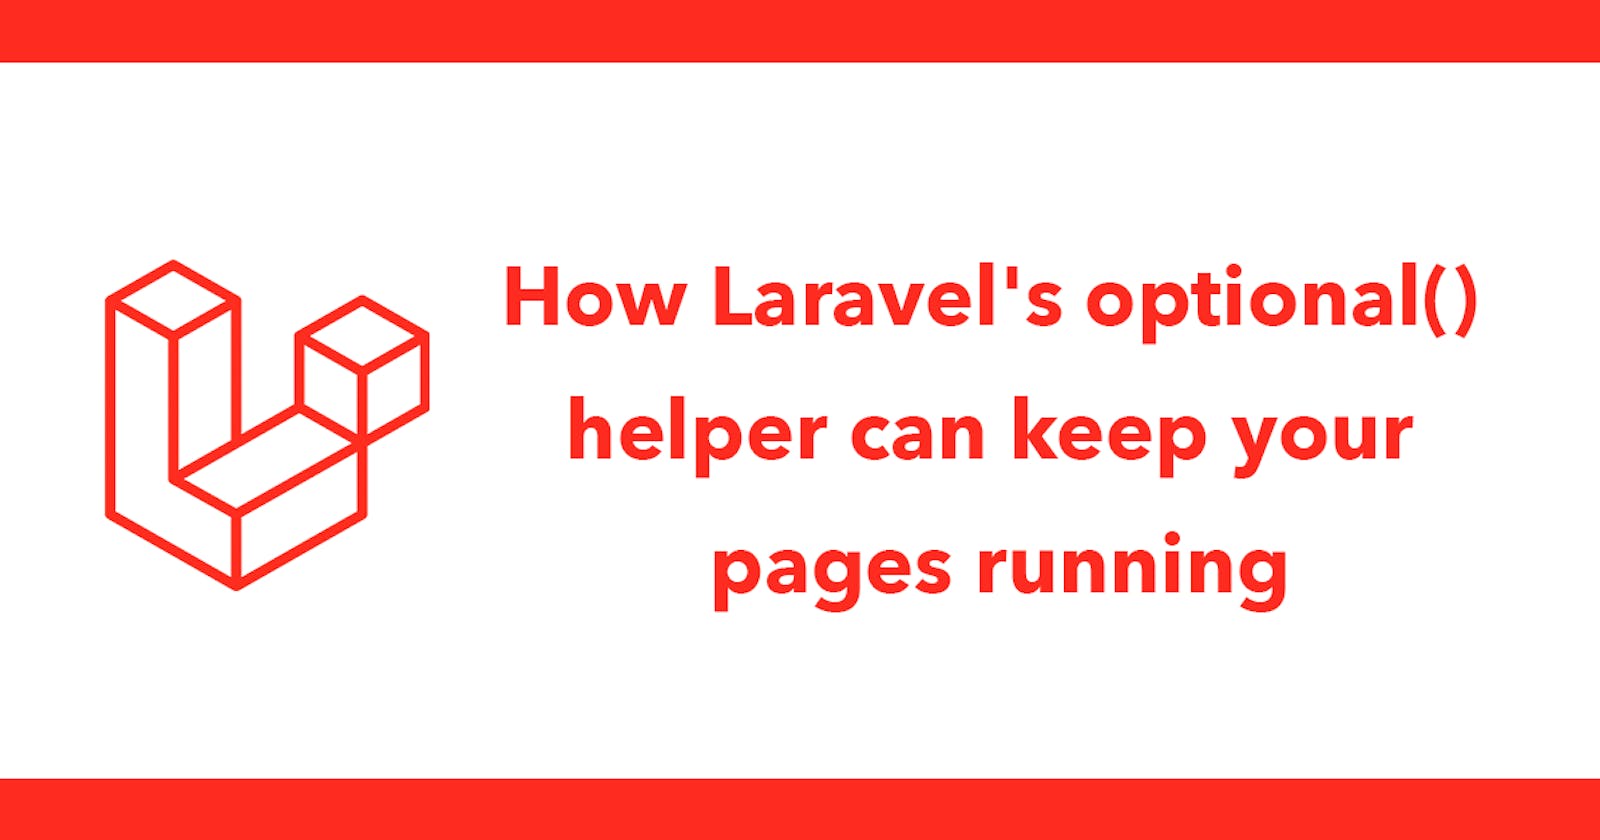 How Laravel's optional() helper can keep your pages running